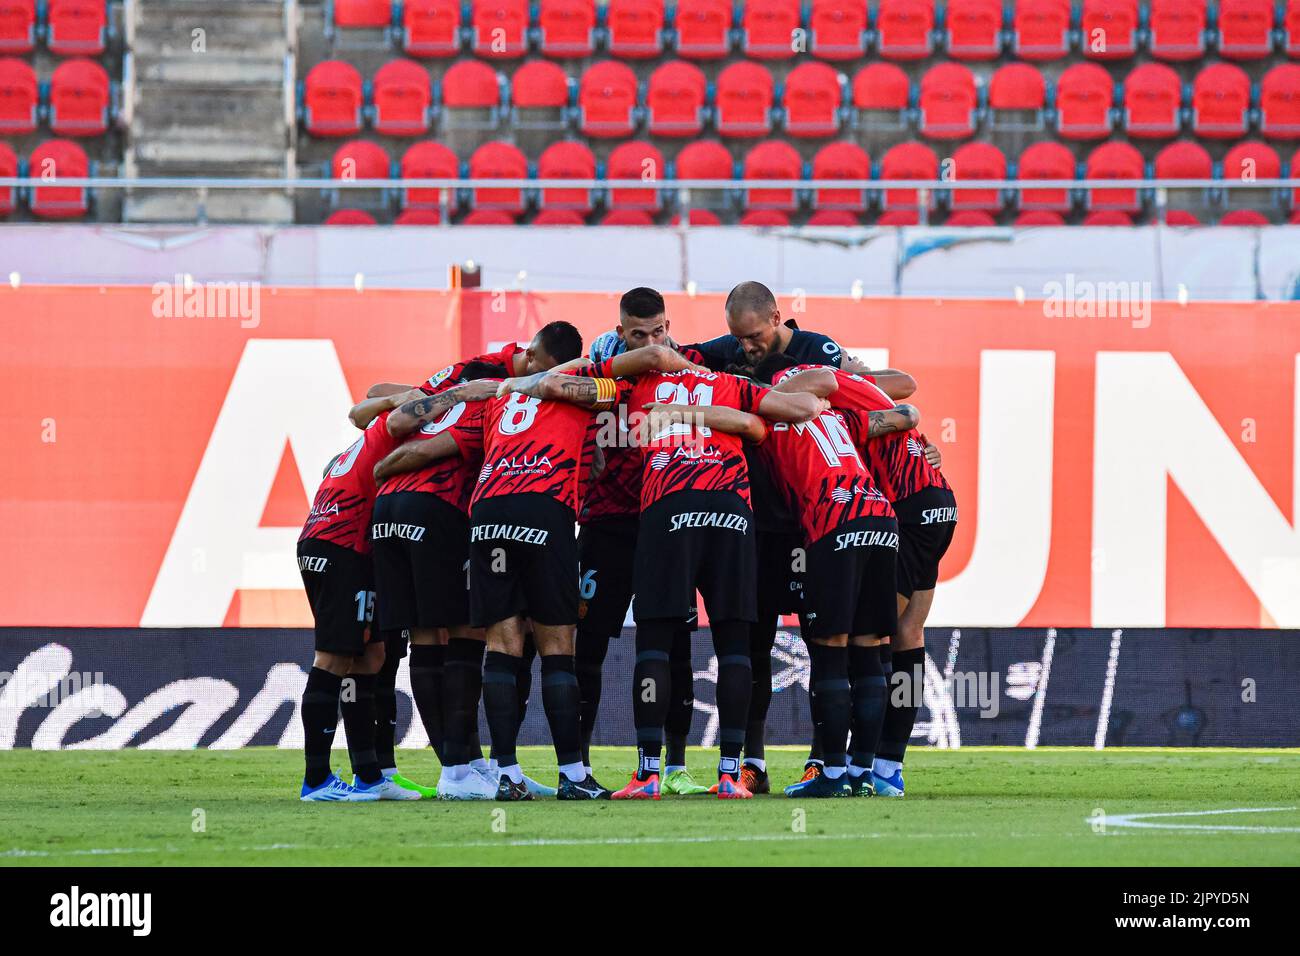 MALLORCA, SPAIN - AUGUST 20: Mallorca players the match between RCD Mallorca and Real Betis of La Liga Santander on August 20, 2022 at Visit Mallorca Stadium Son Moix in Mallorca, Spain. (Photo by Samuel Carreño/PxImages) Stock Photo